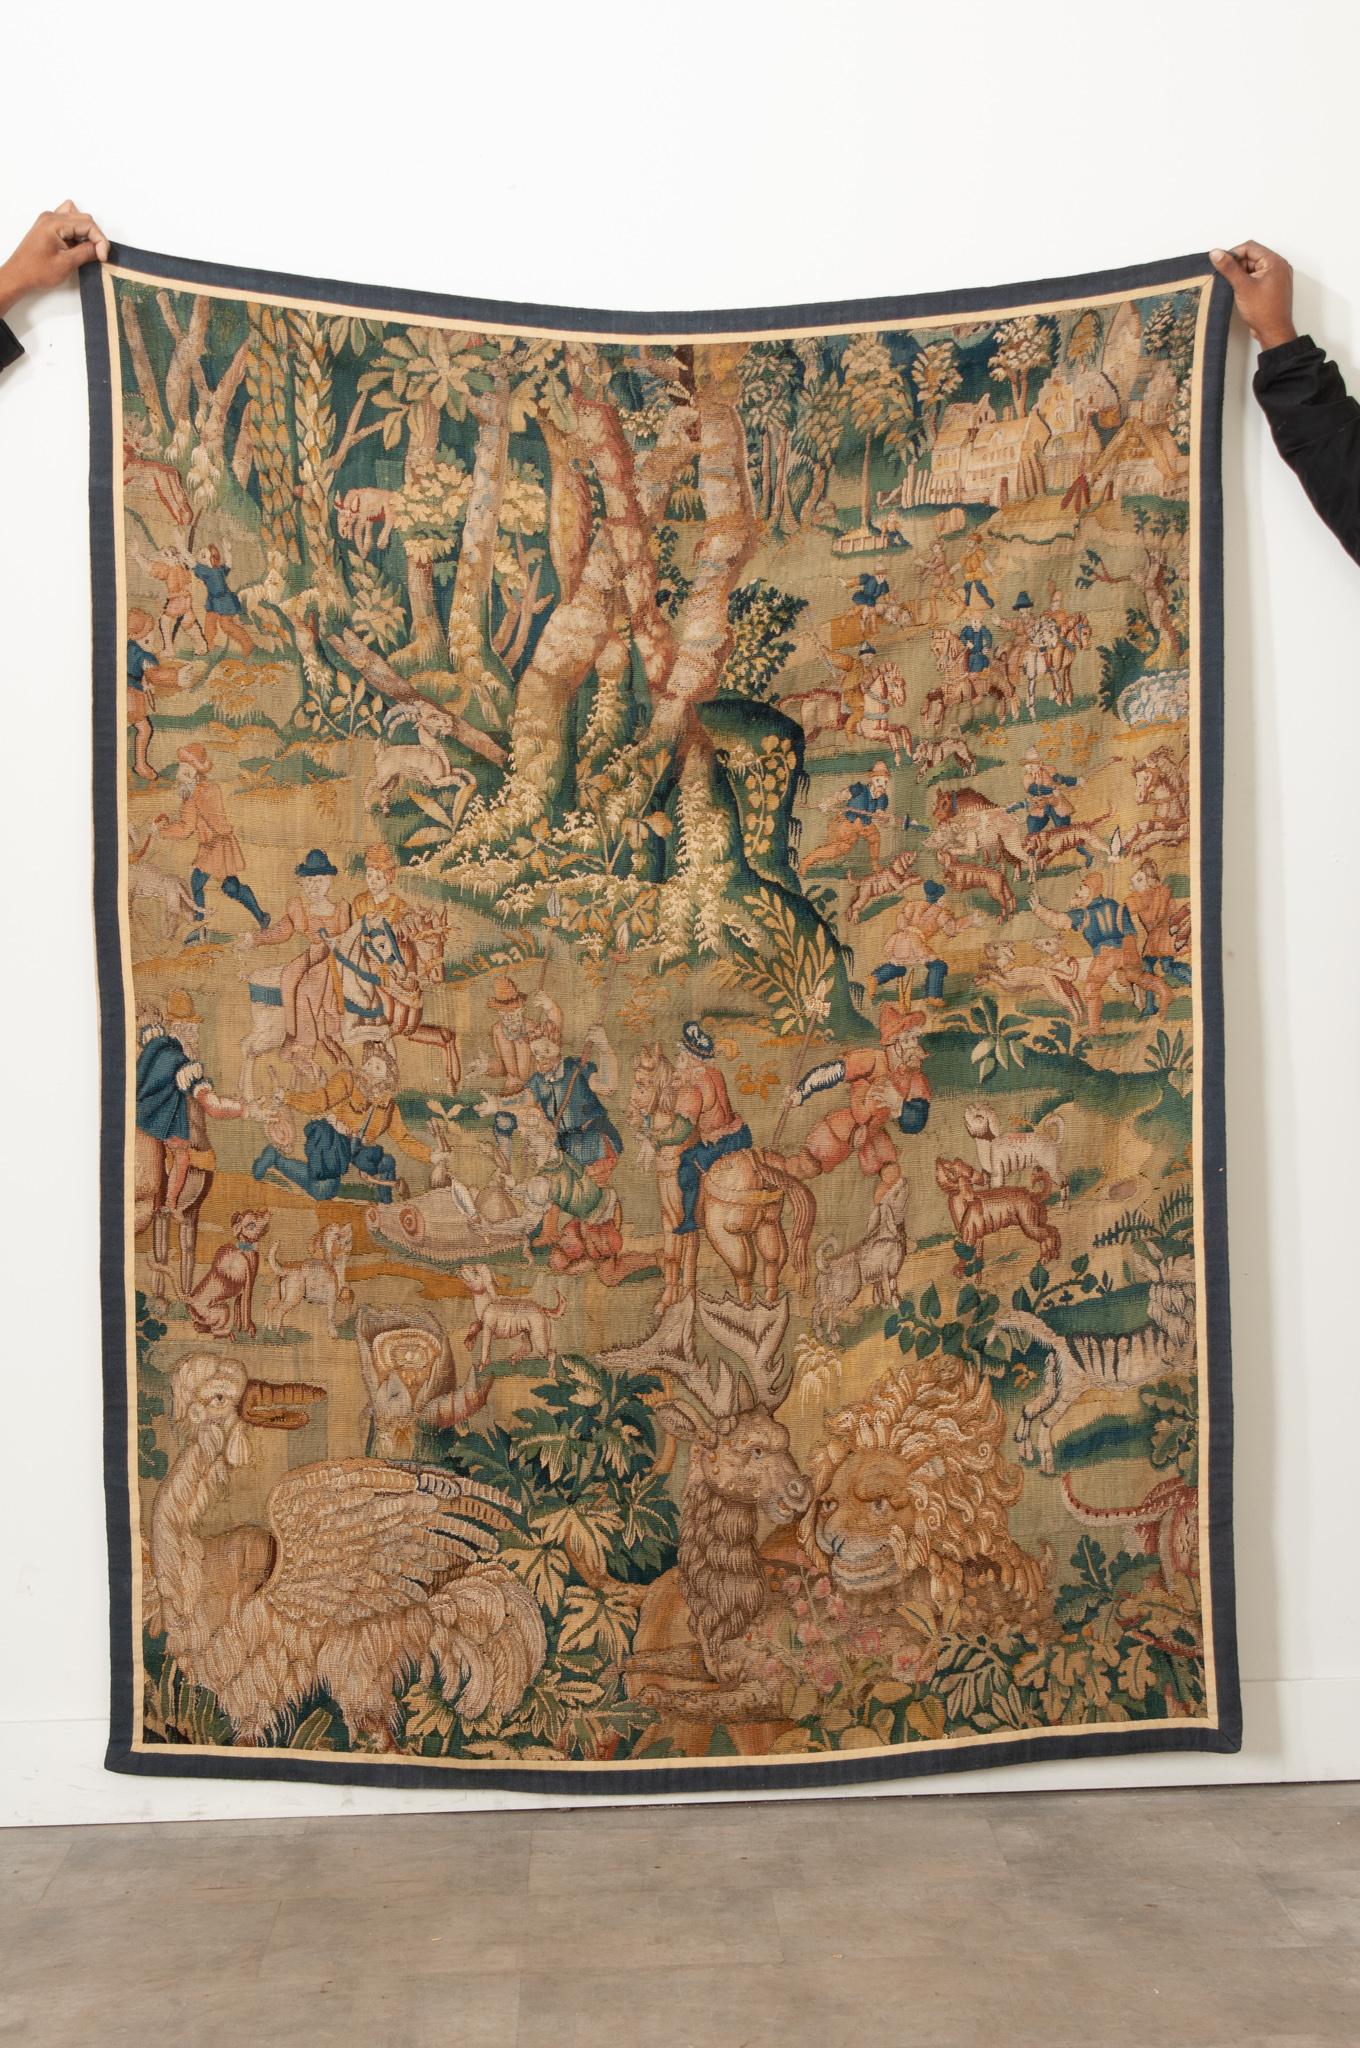 A 18th Century, or earlier, tapestry is vibrant and in wonderful antique condition. Tapestries were first created in the middle ages to hold in warm in otherwise cold stone buildings, over the years they have become practical traveling pieces of art